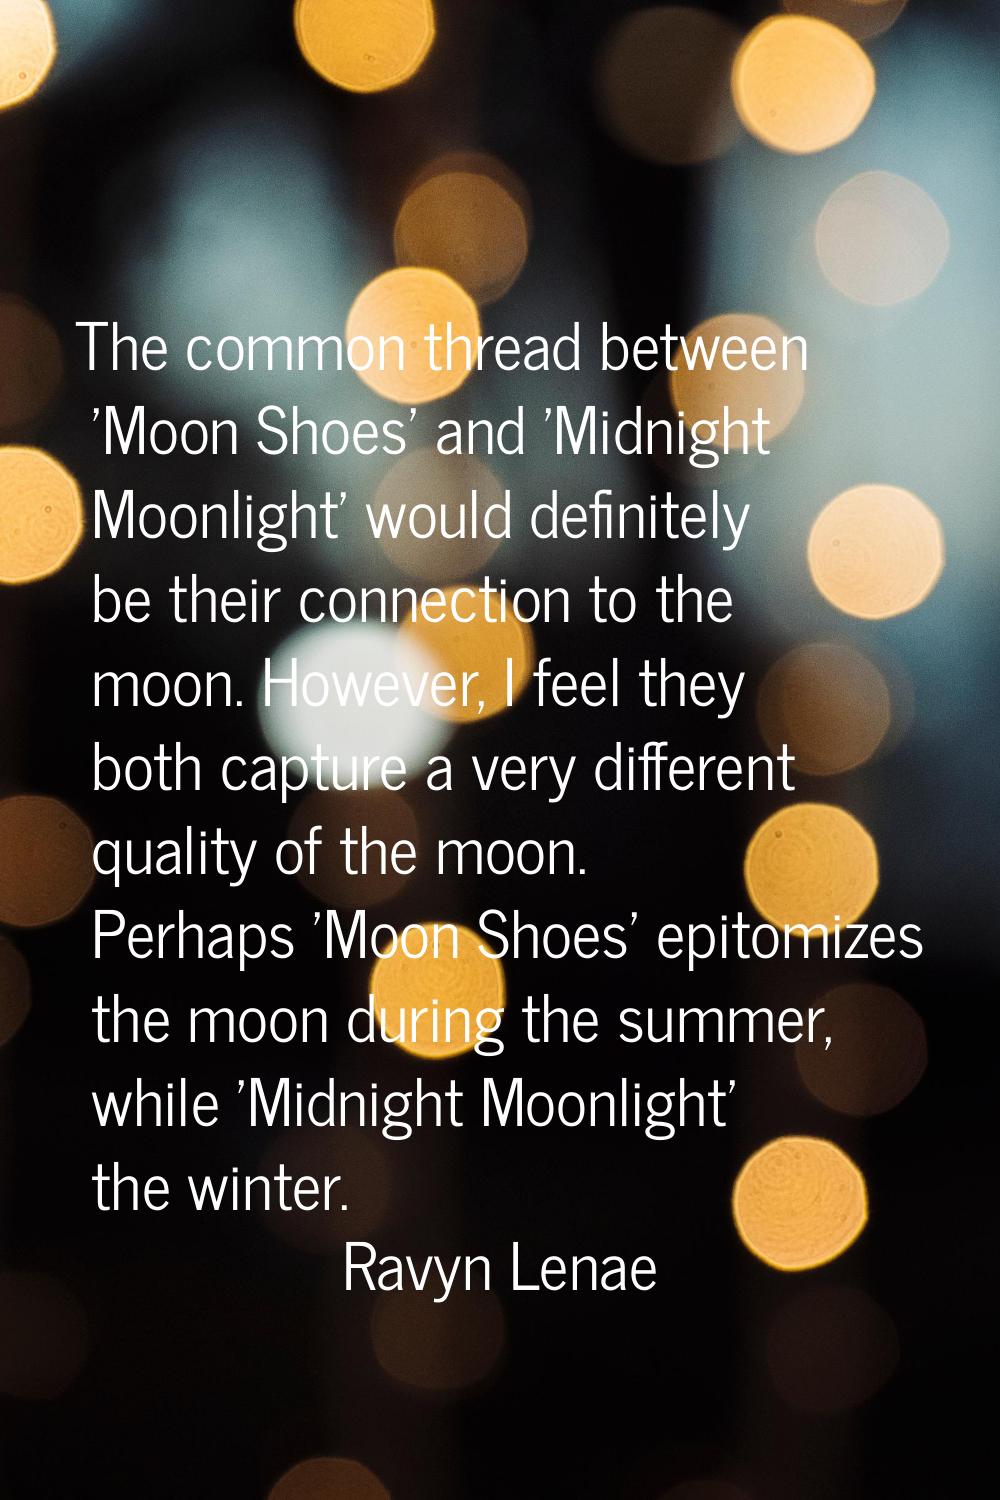 The common thread between 'Moon Shoes' and 'Midnight Moonlight' would definitely be their connectio